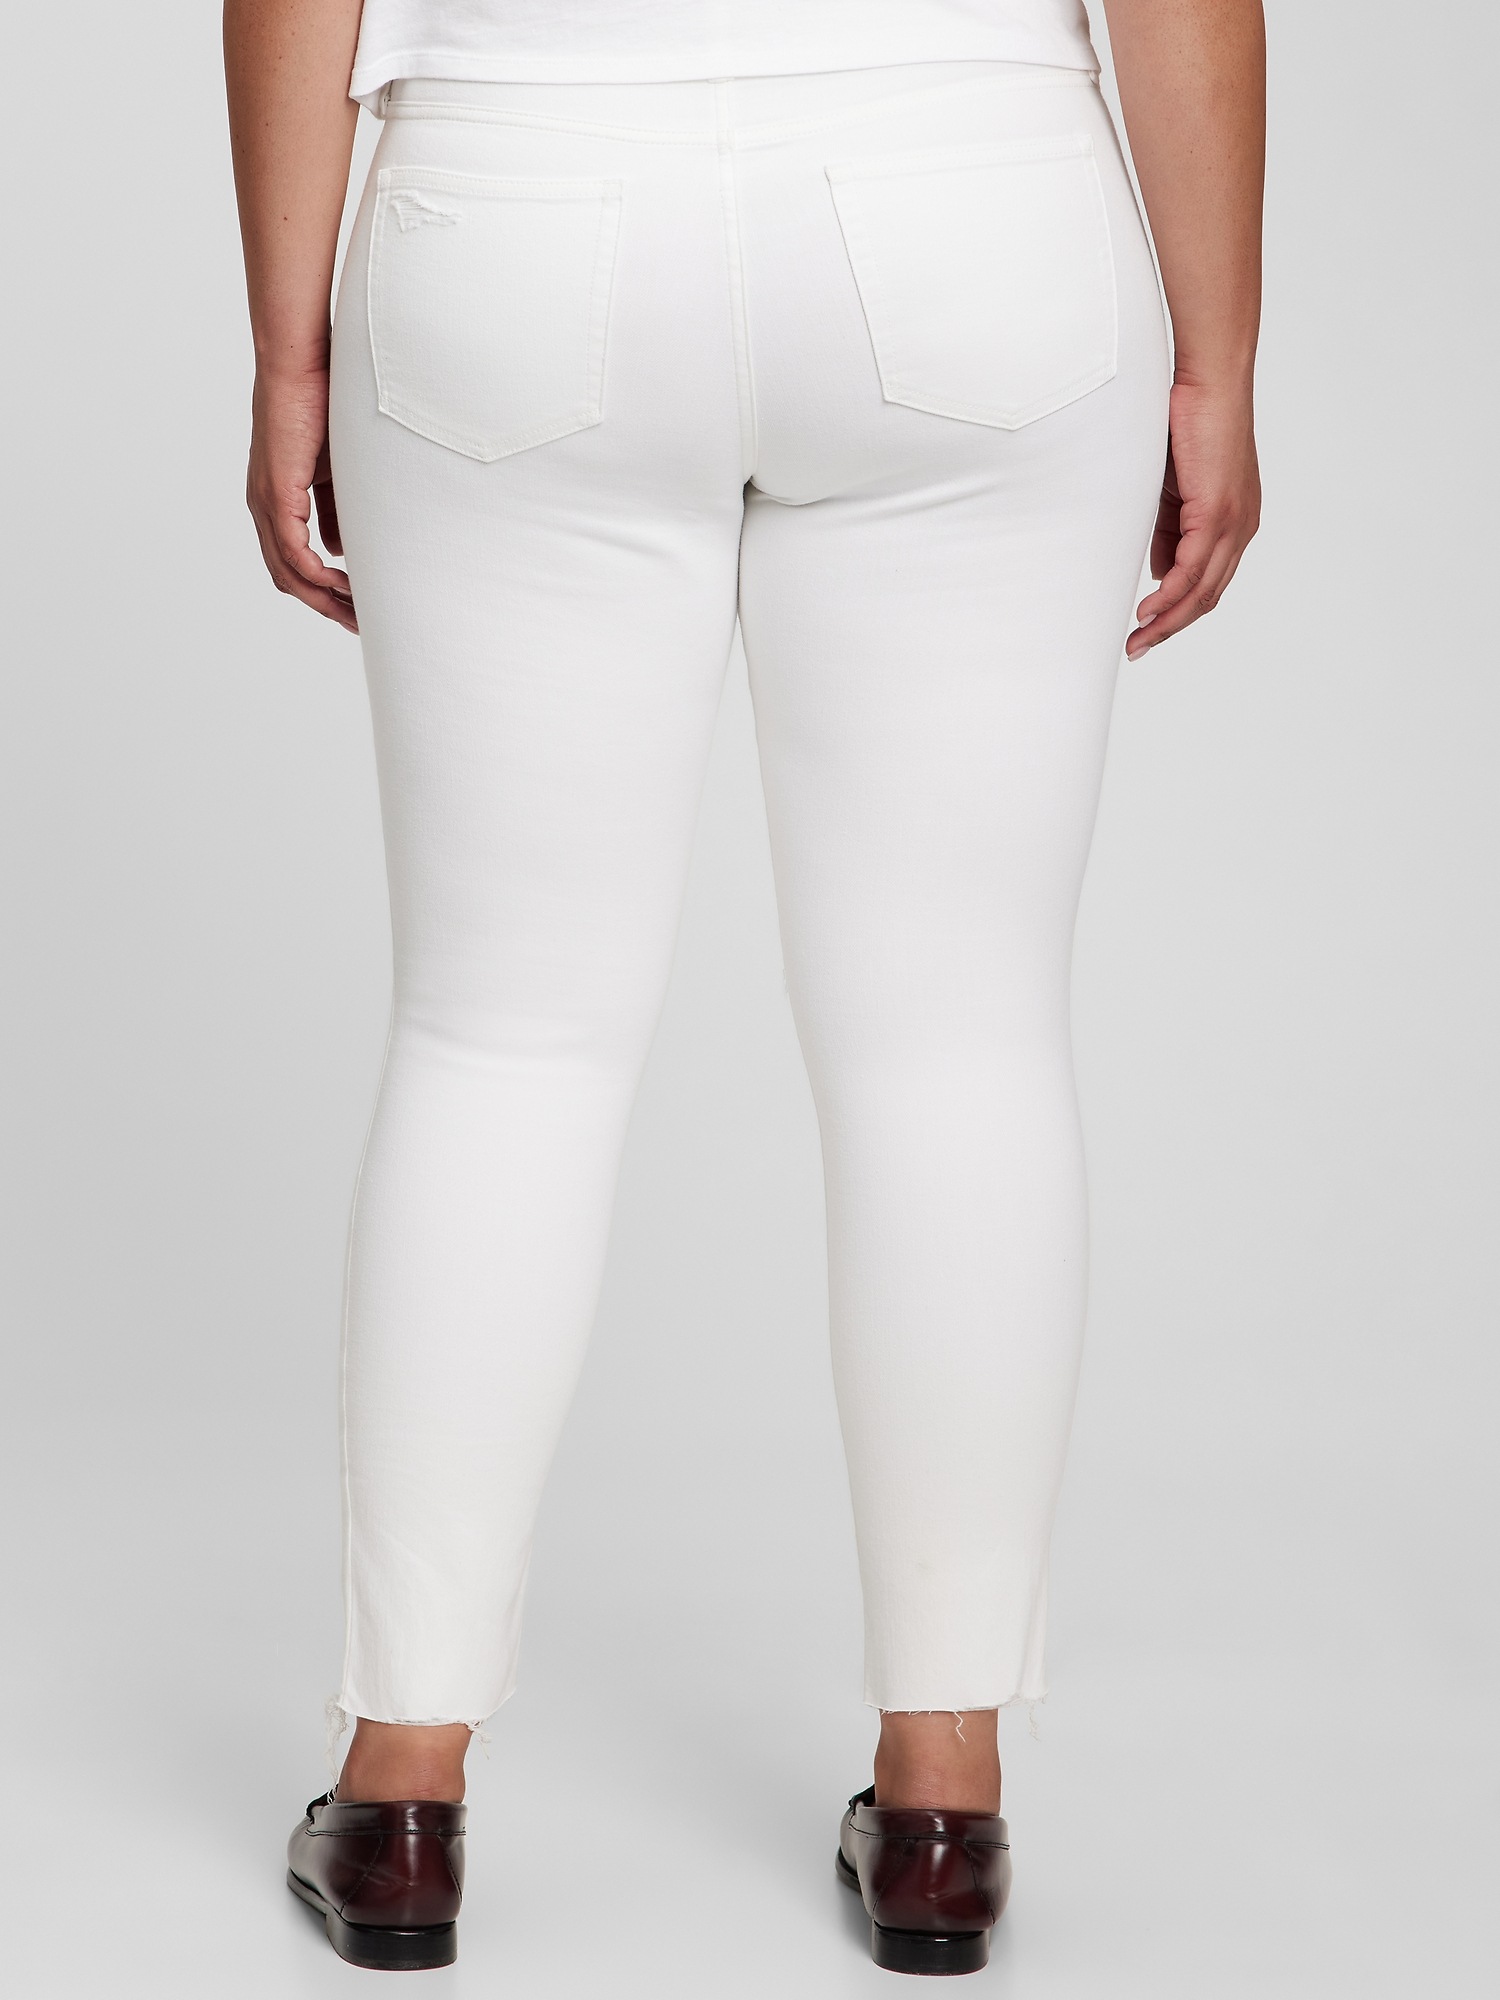 Mid Rise True Skinny Jeans With Washwell Gap